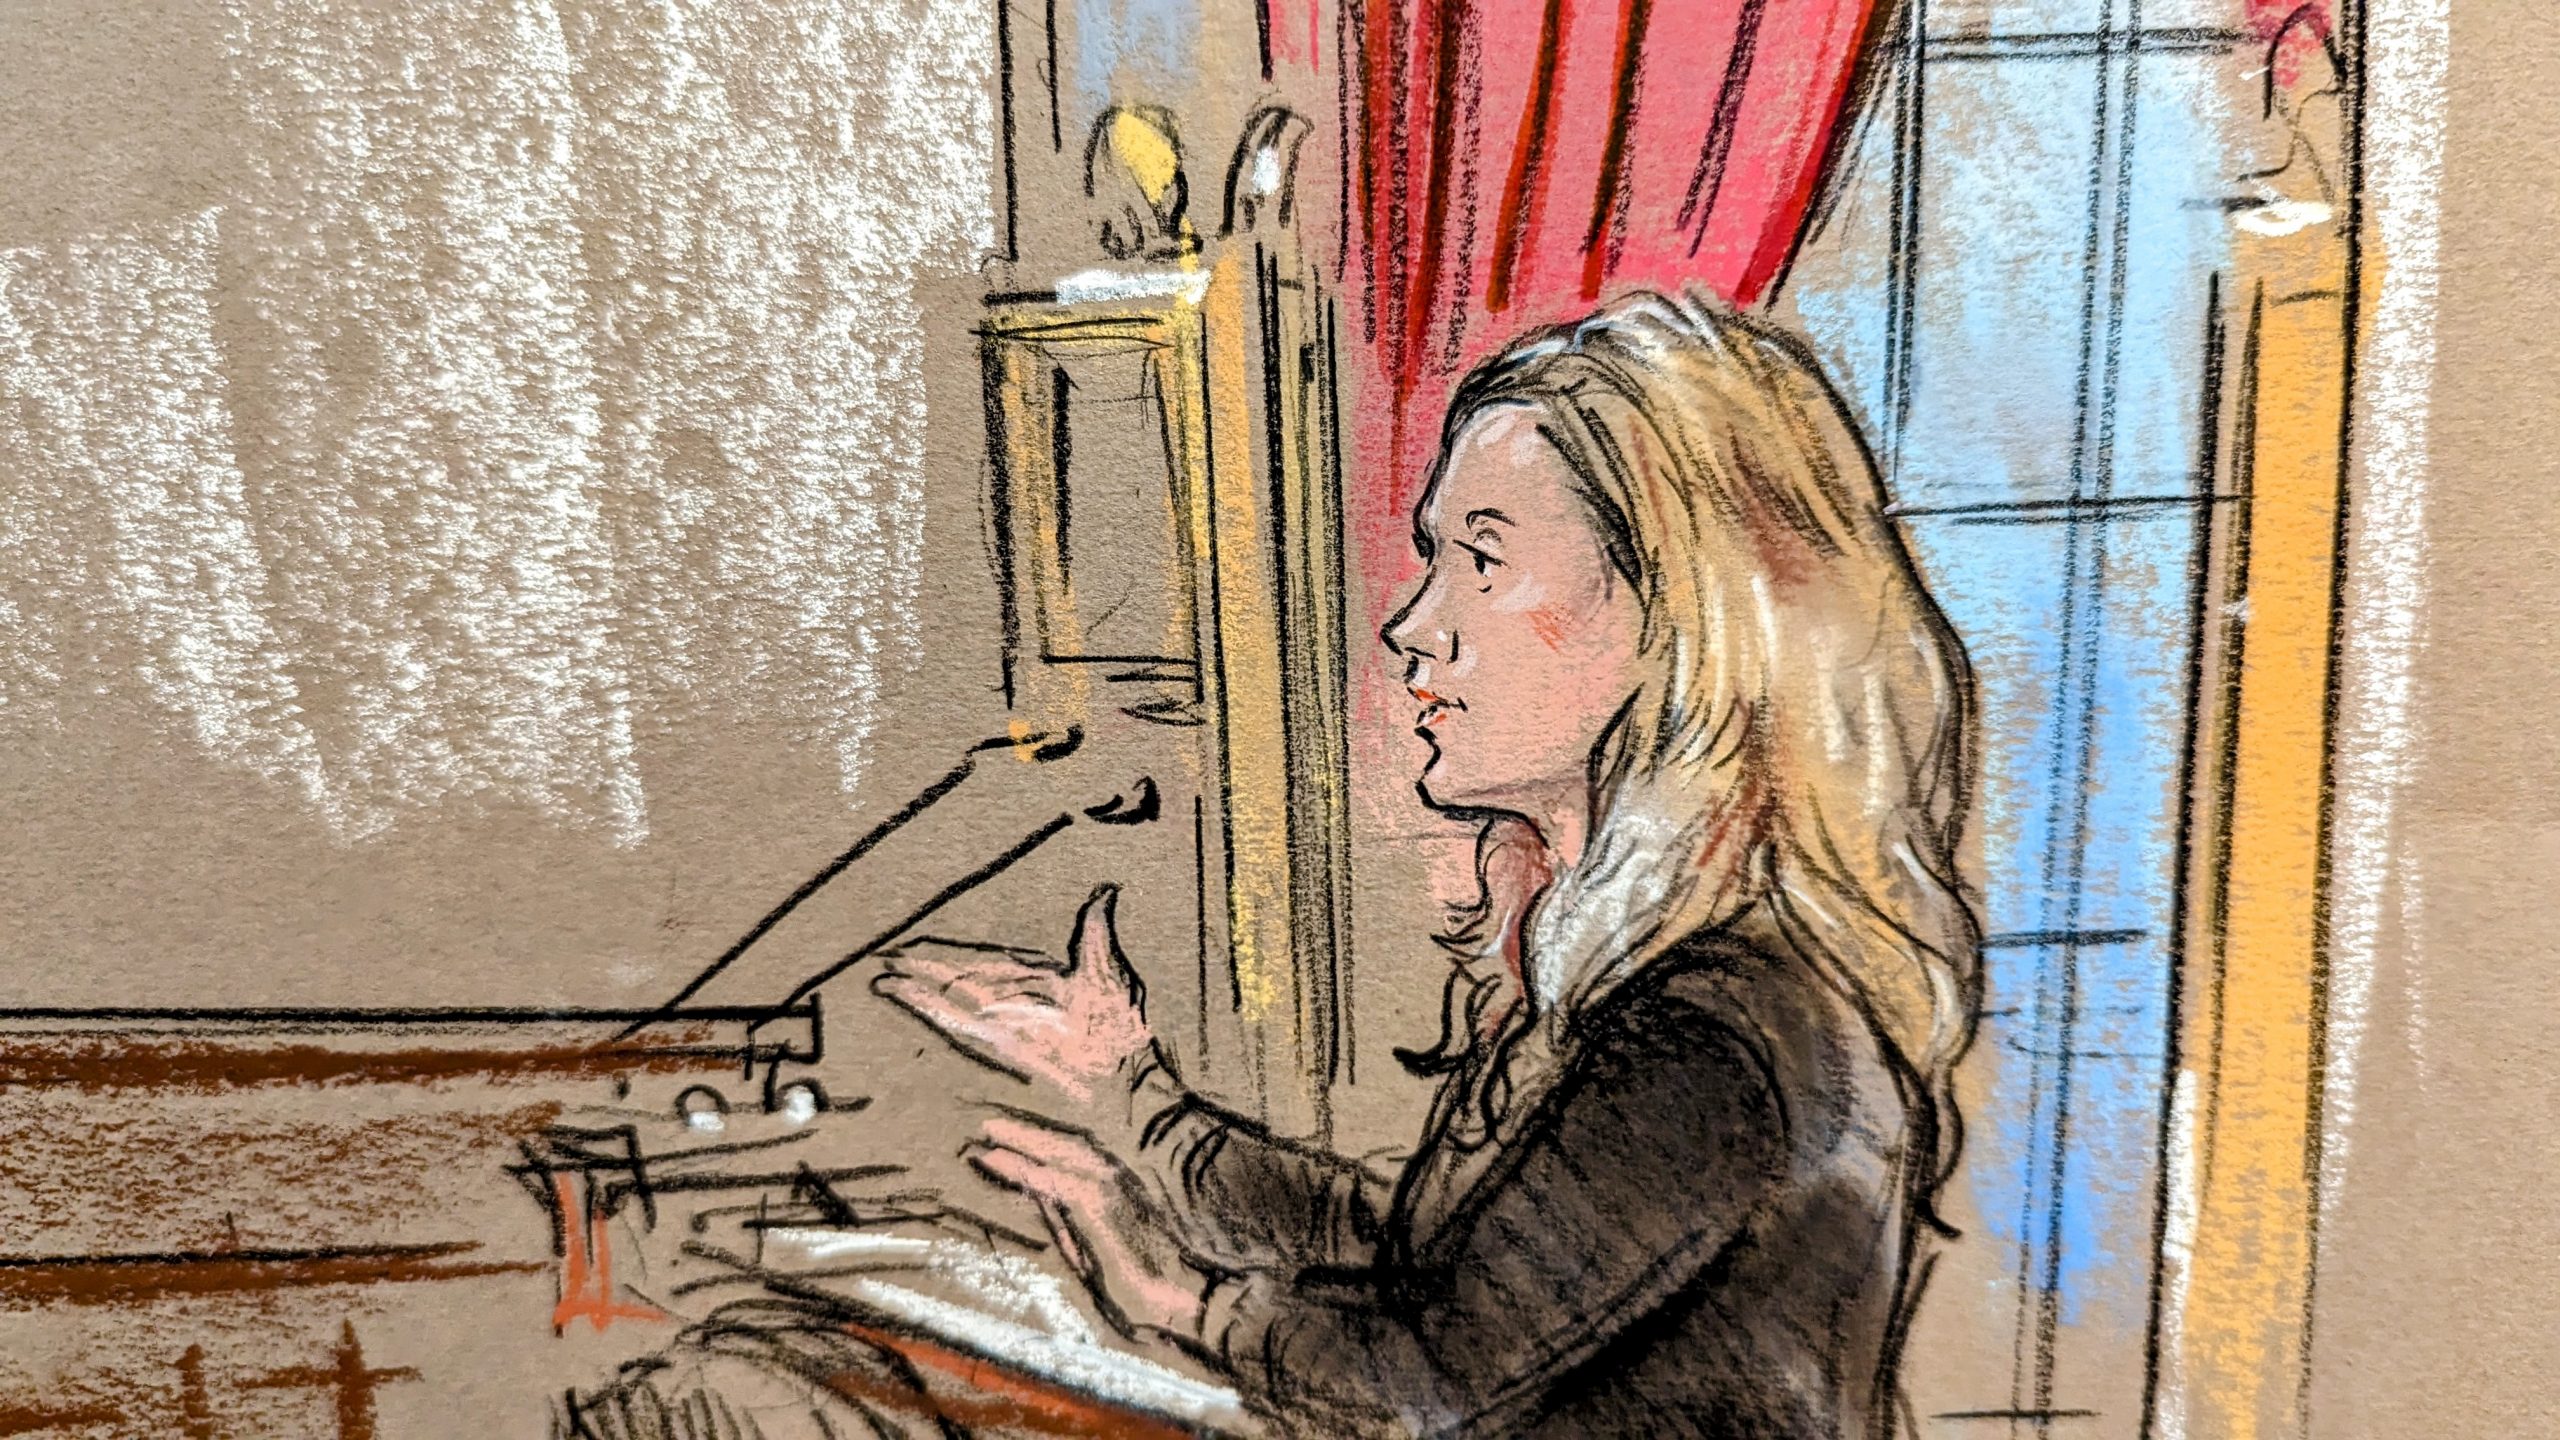 Sketch of a woman arguing at the podium.